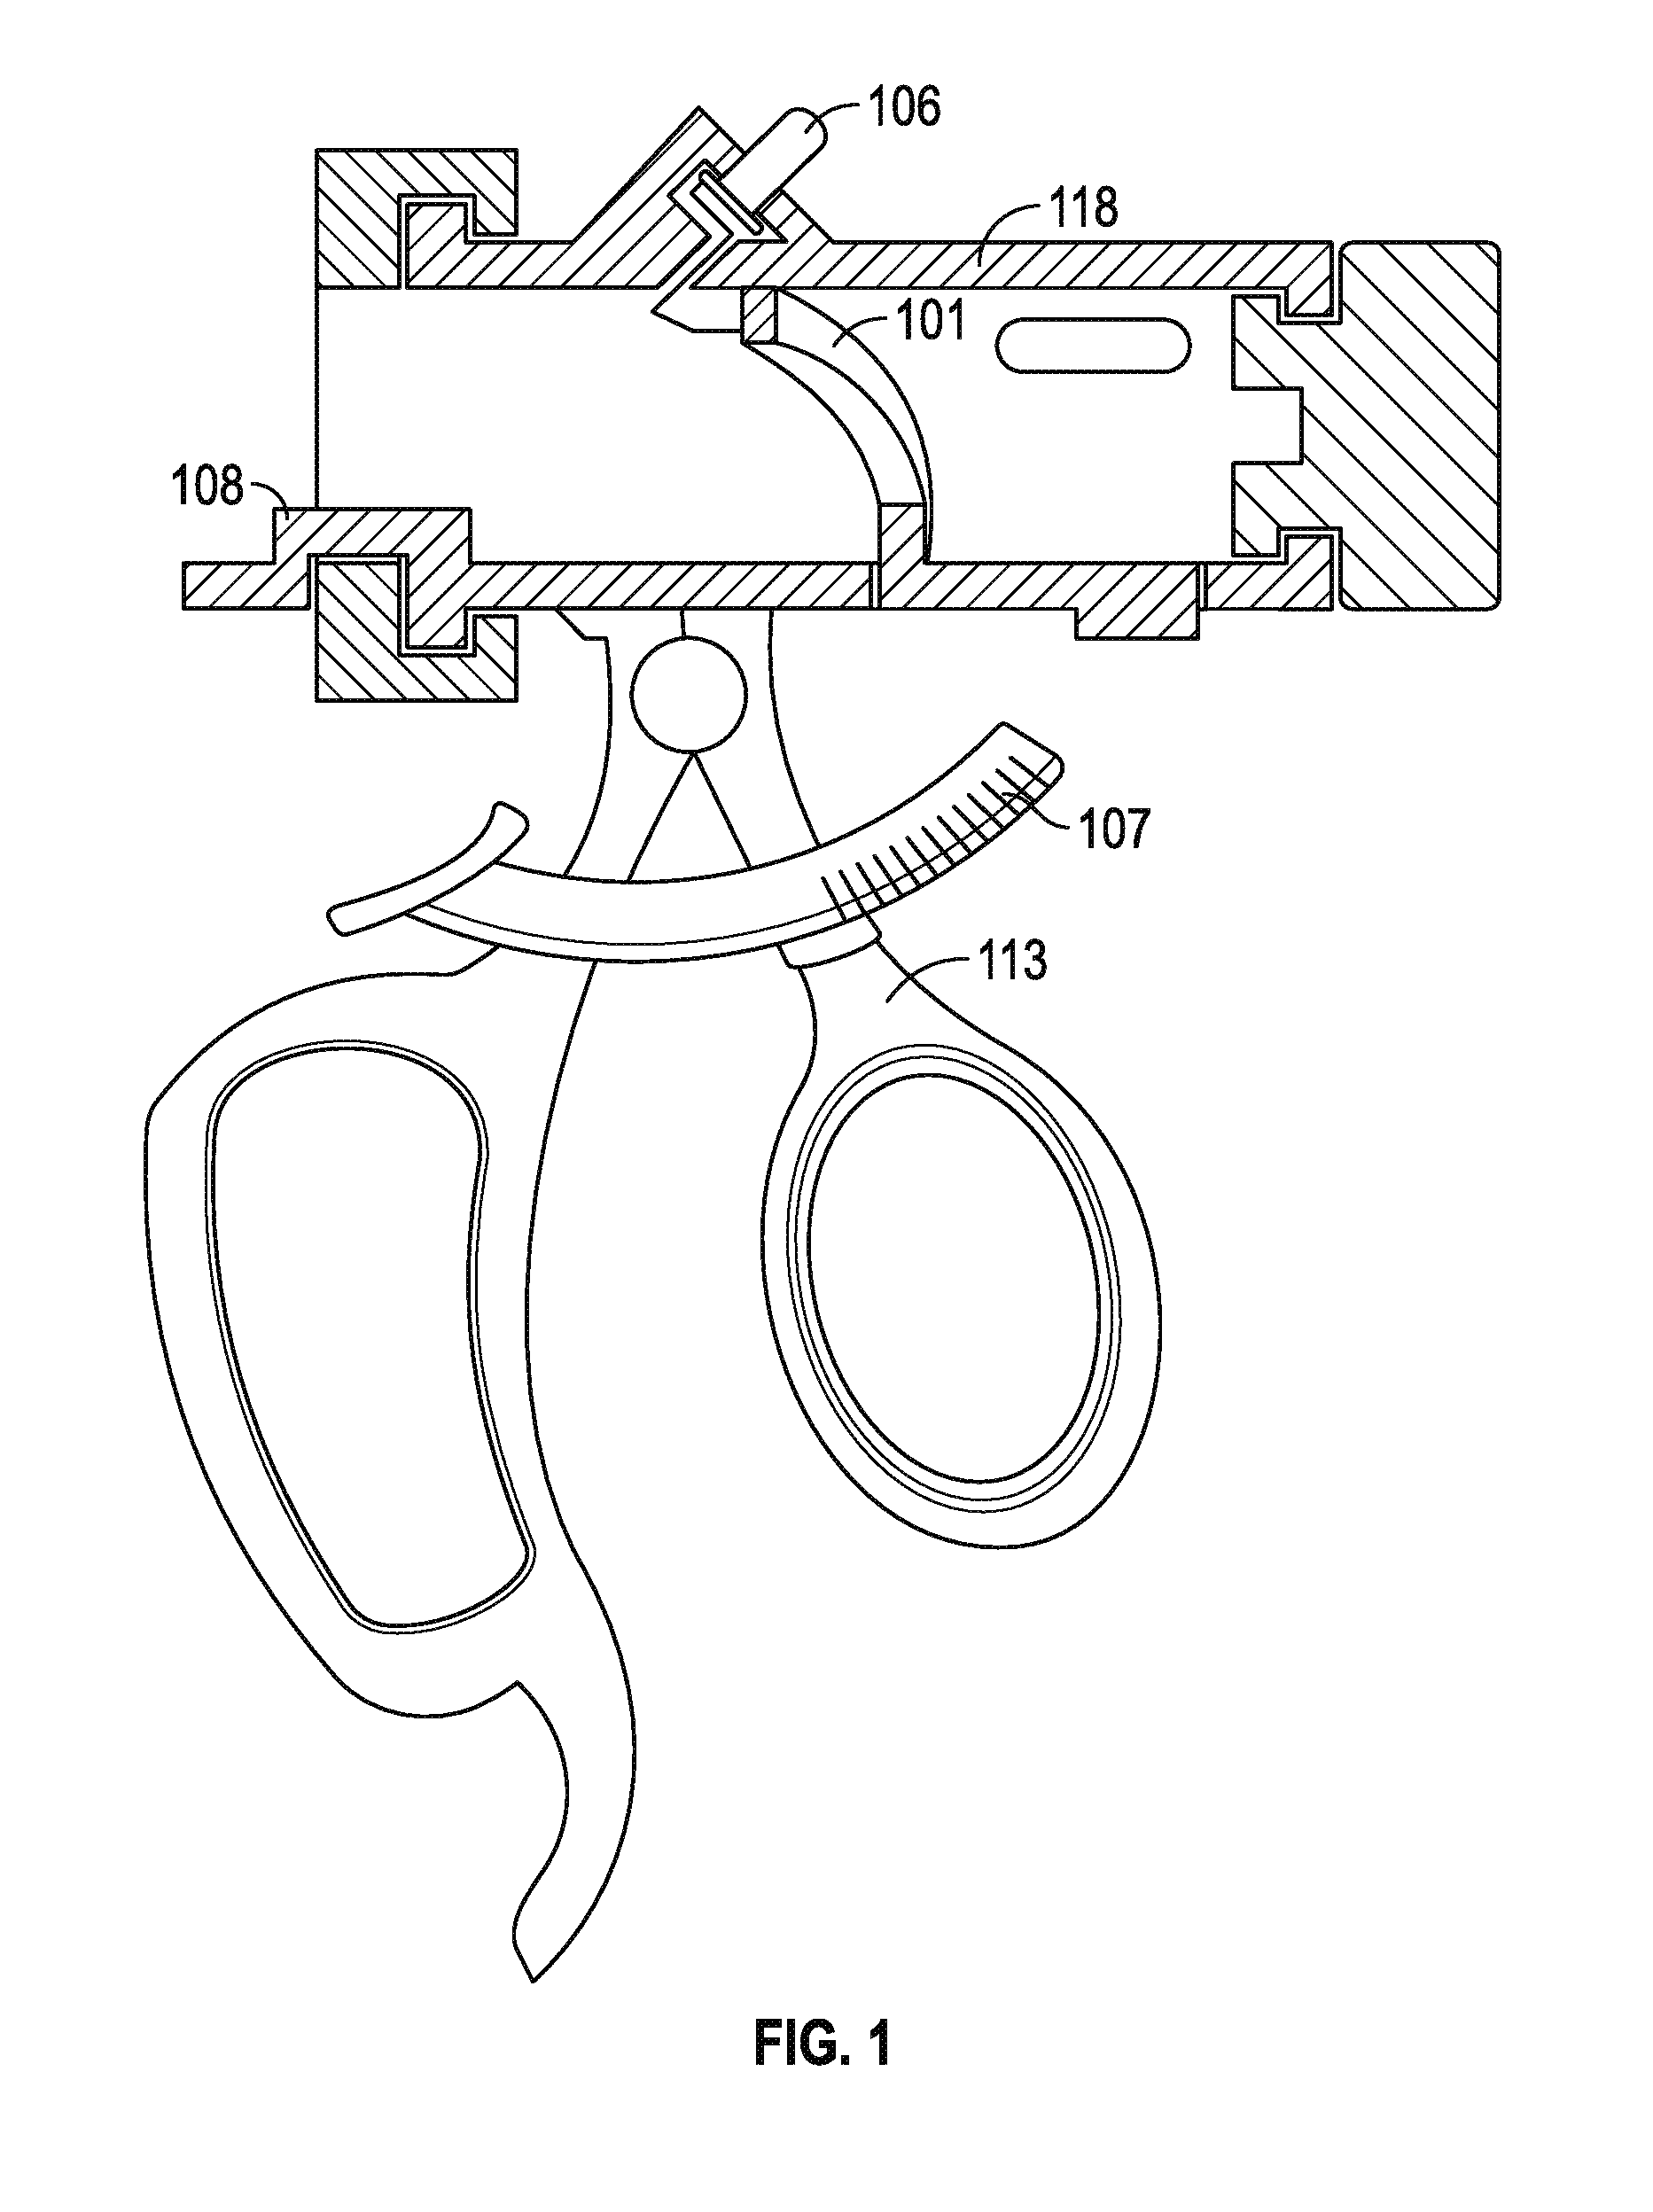 Surgical instrument with multiple instrument interchangeability